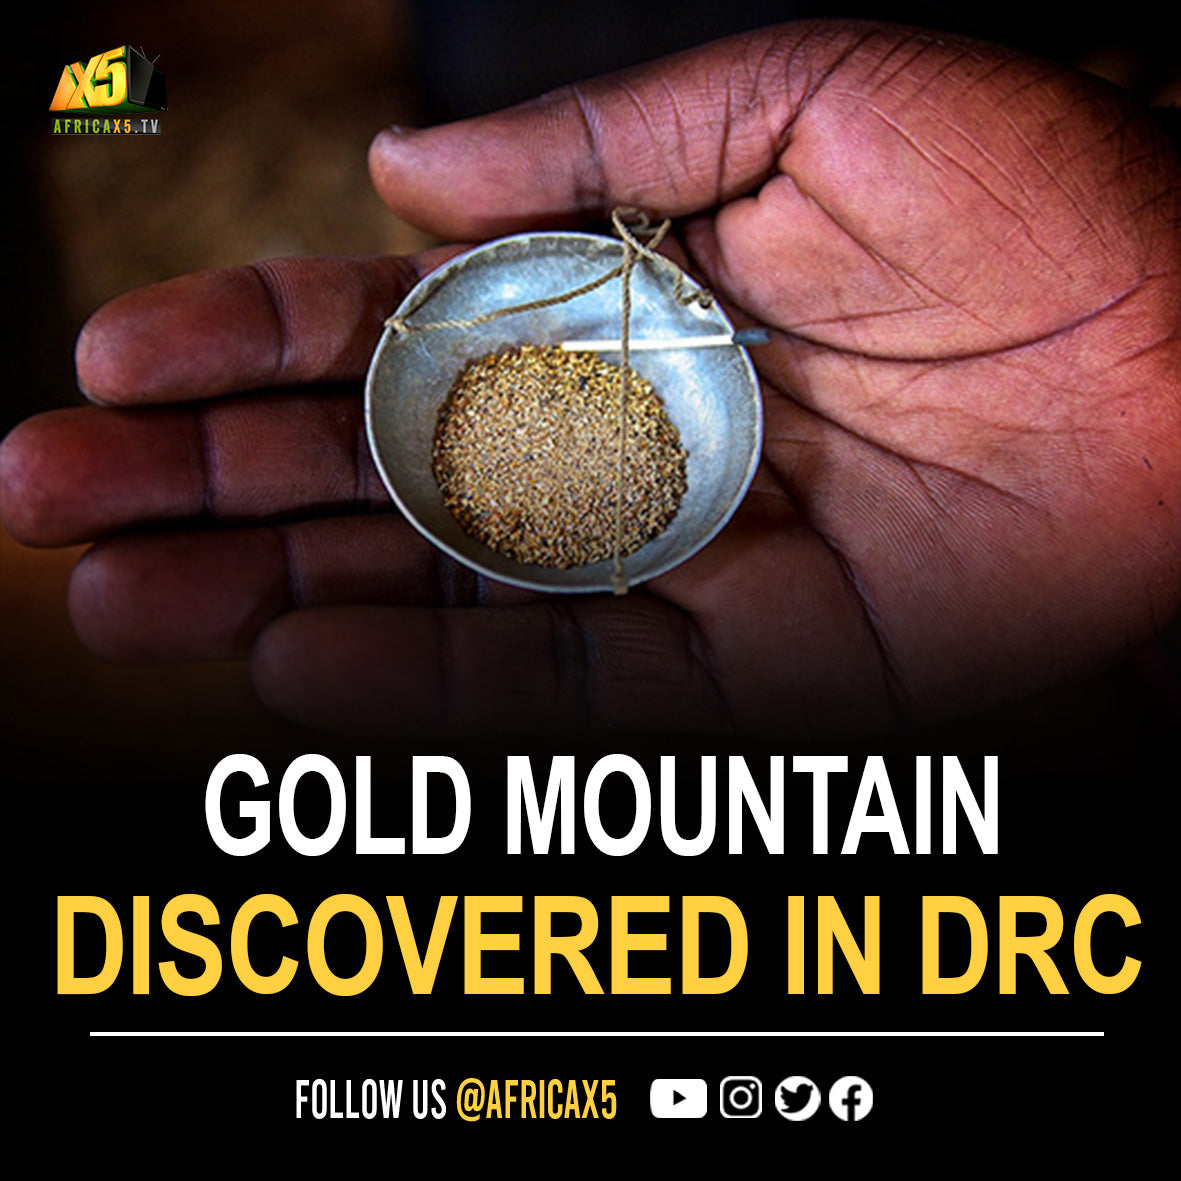 Mountain filled with gold was discovered in Democratic Republic of the Congo